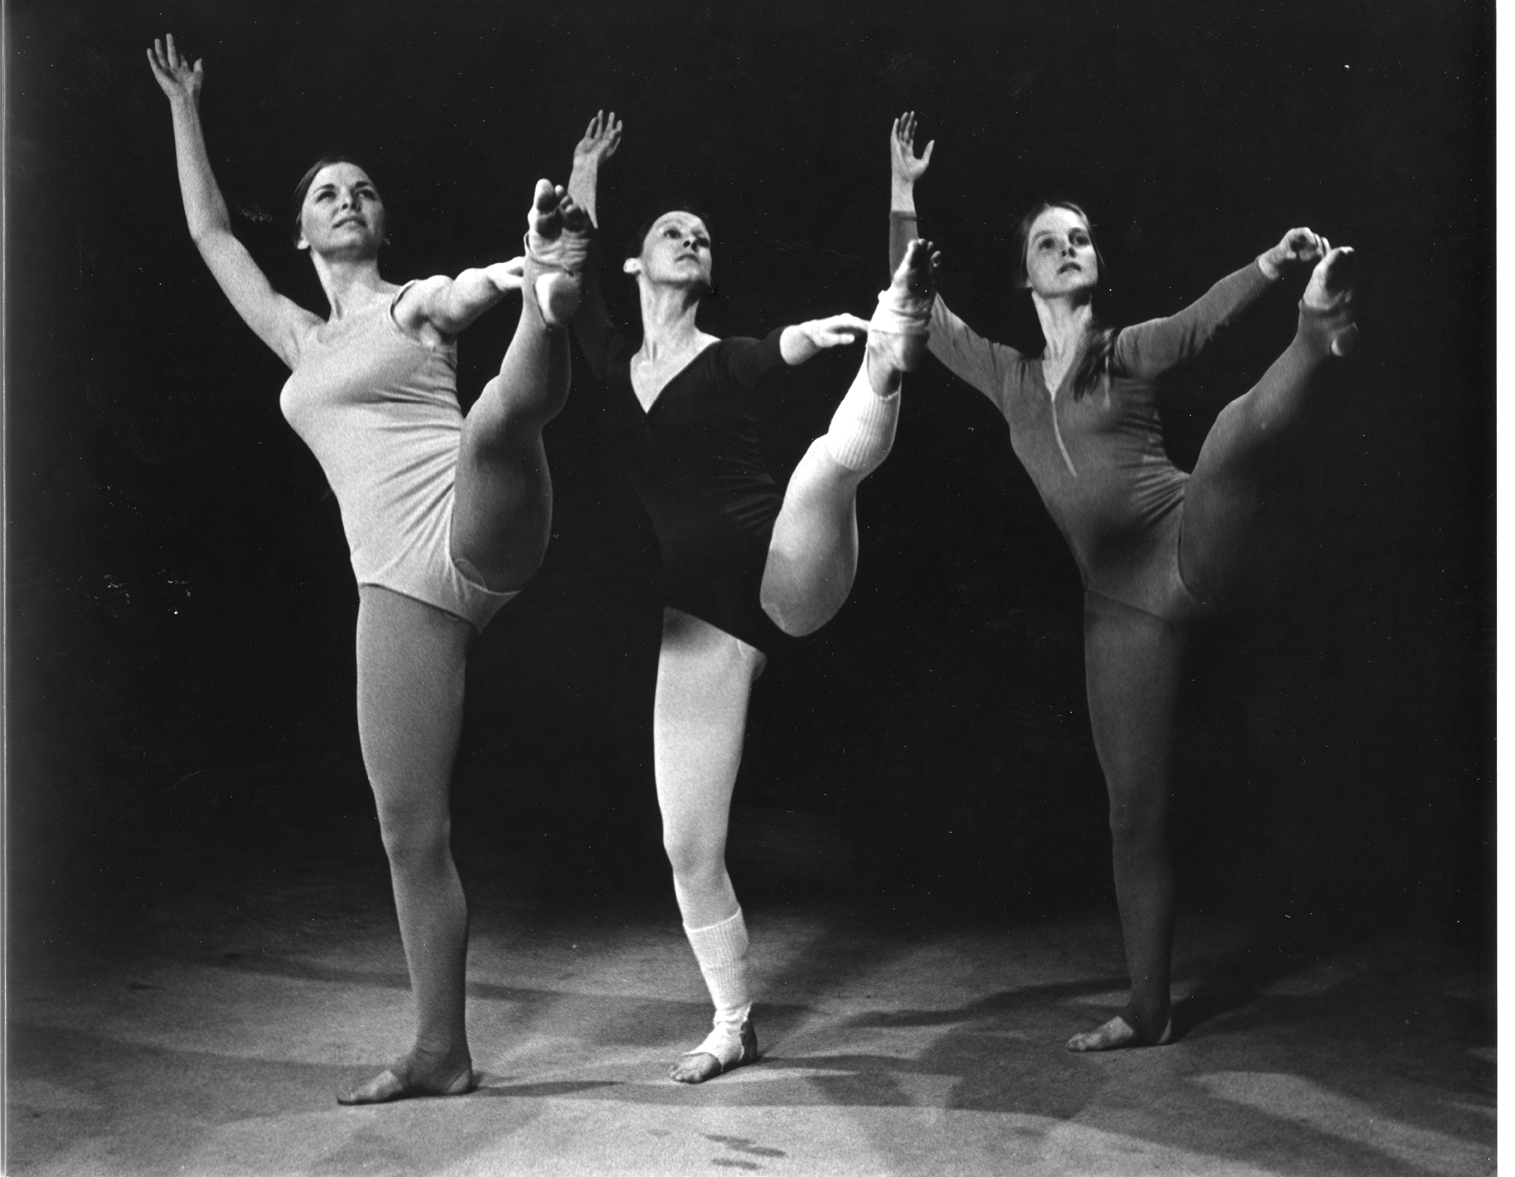 Ha'Penny (Orchesis performance), May 9-11, 1973